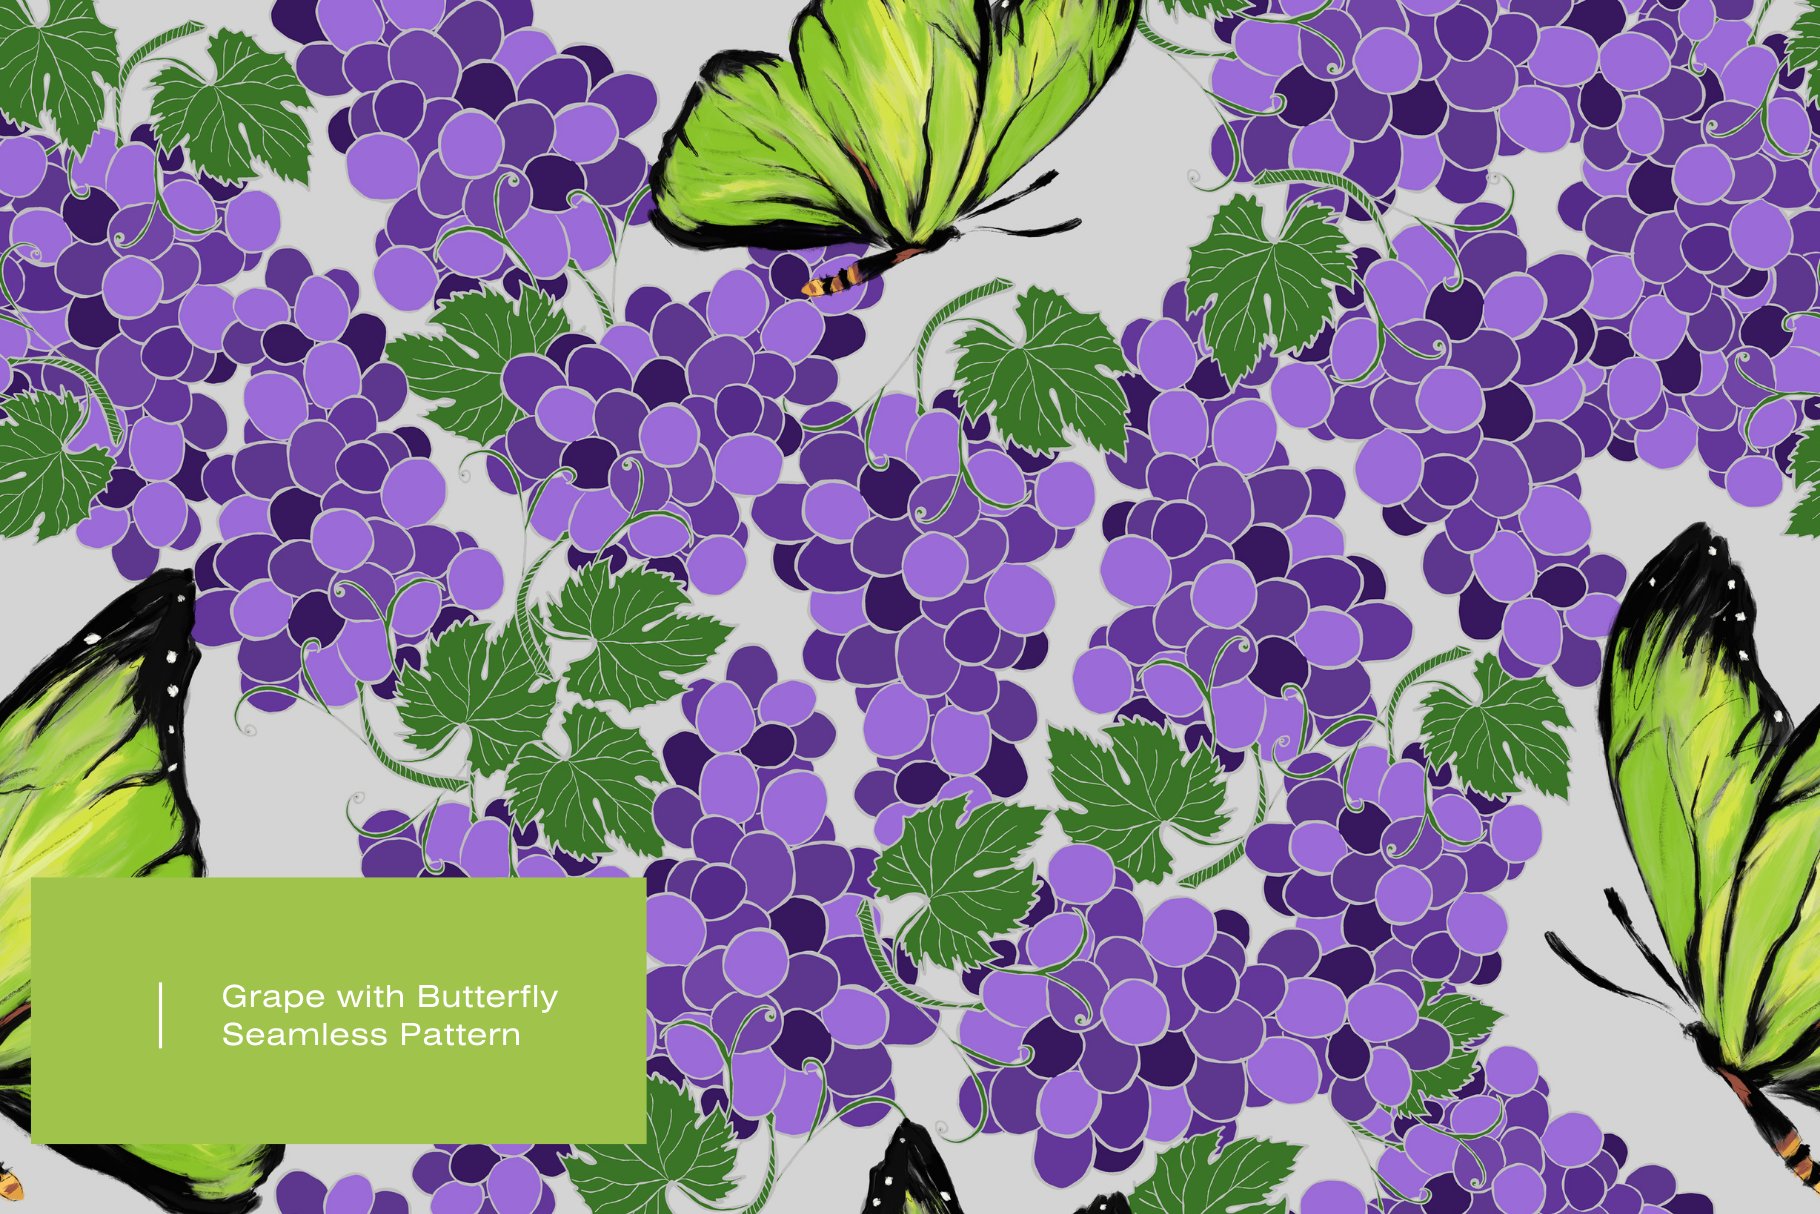 Grape with Butterfly | Seamless cover image.